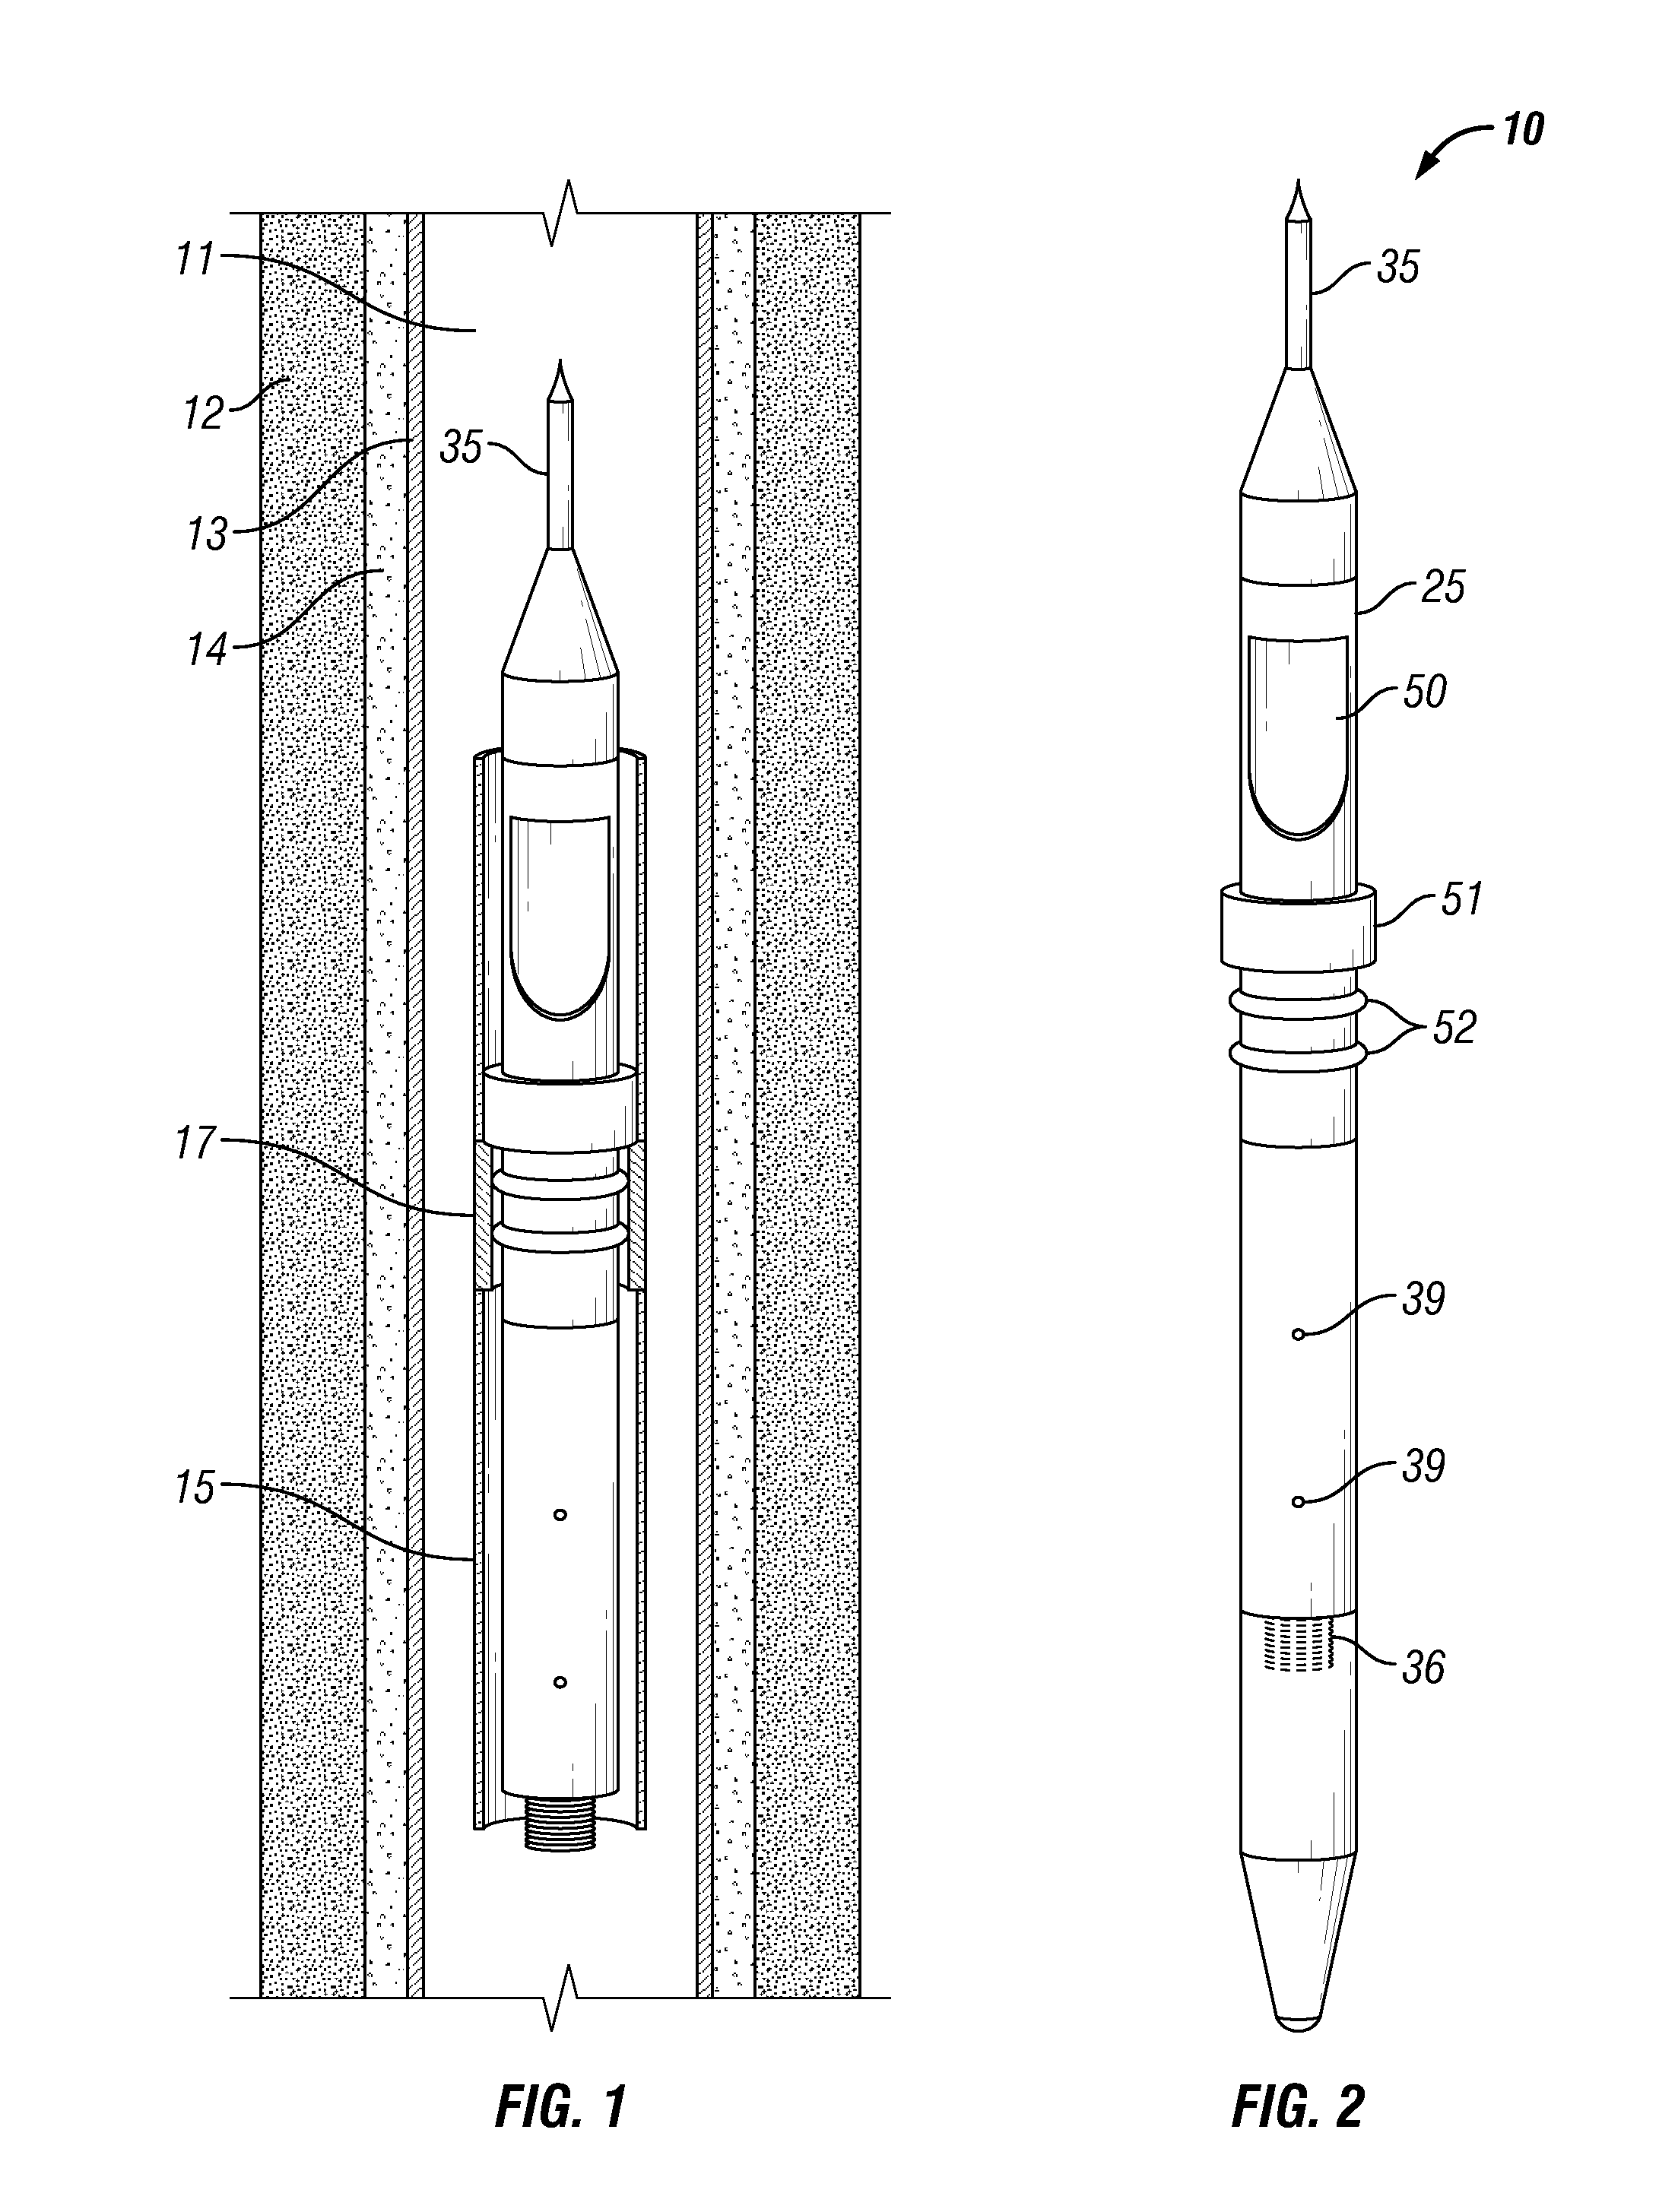 Apparatus and method for jet perforating and cutting tool